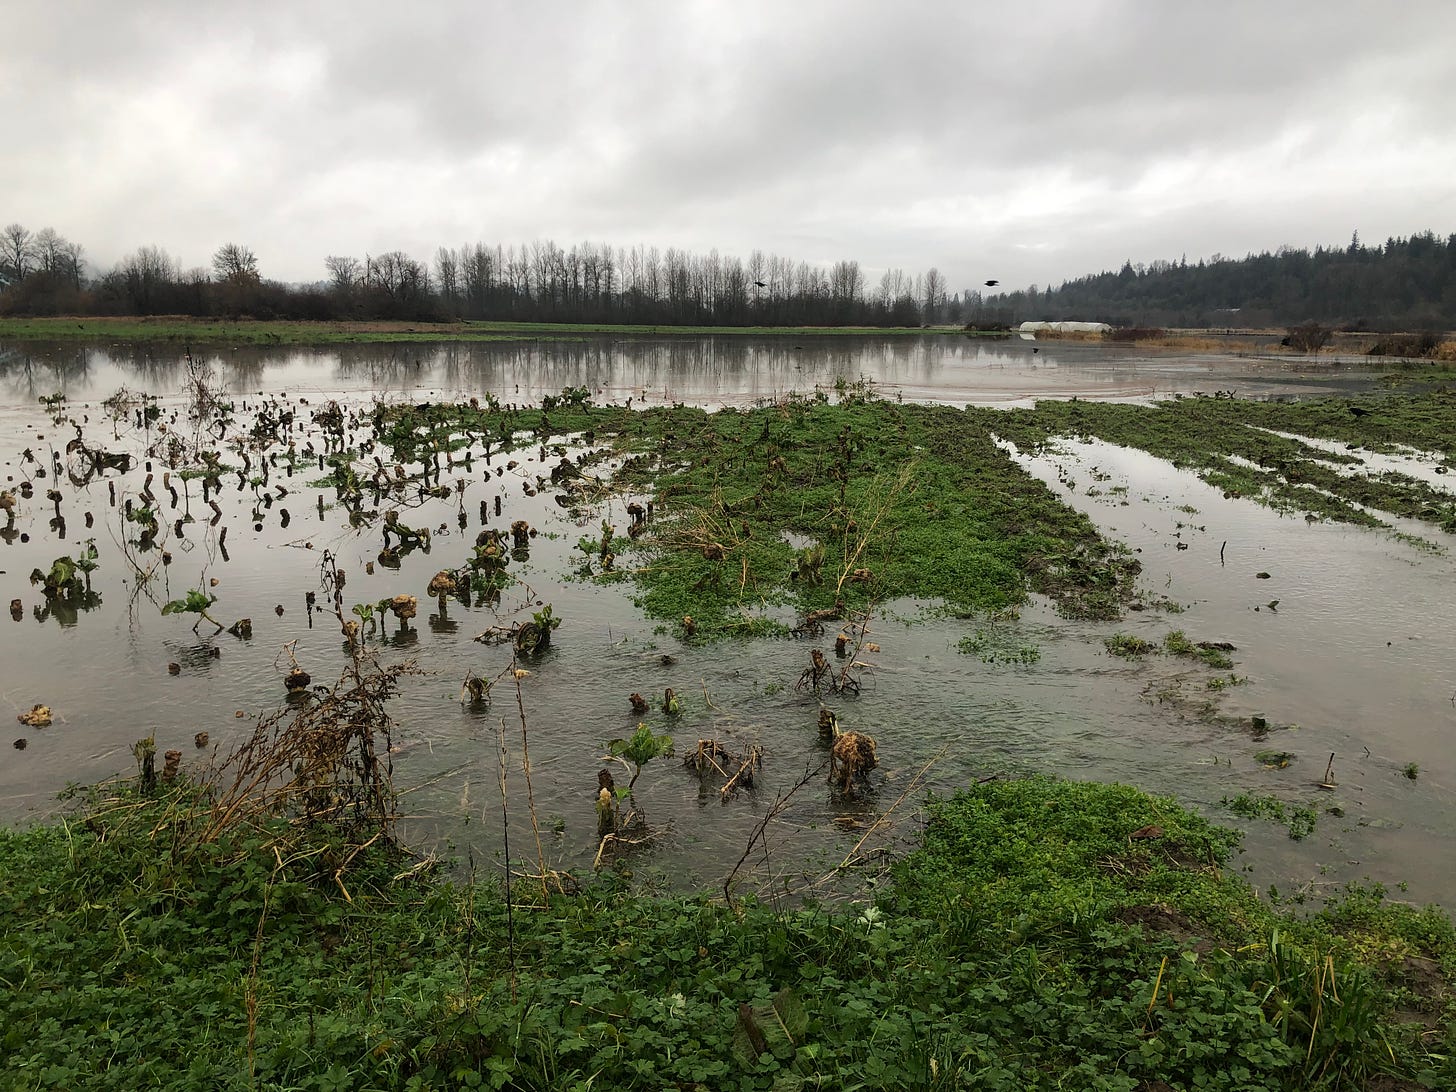 a flooded field, with rows of rotting cauliflower stems and some green plants emerging above the water line